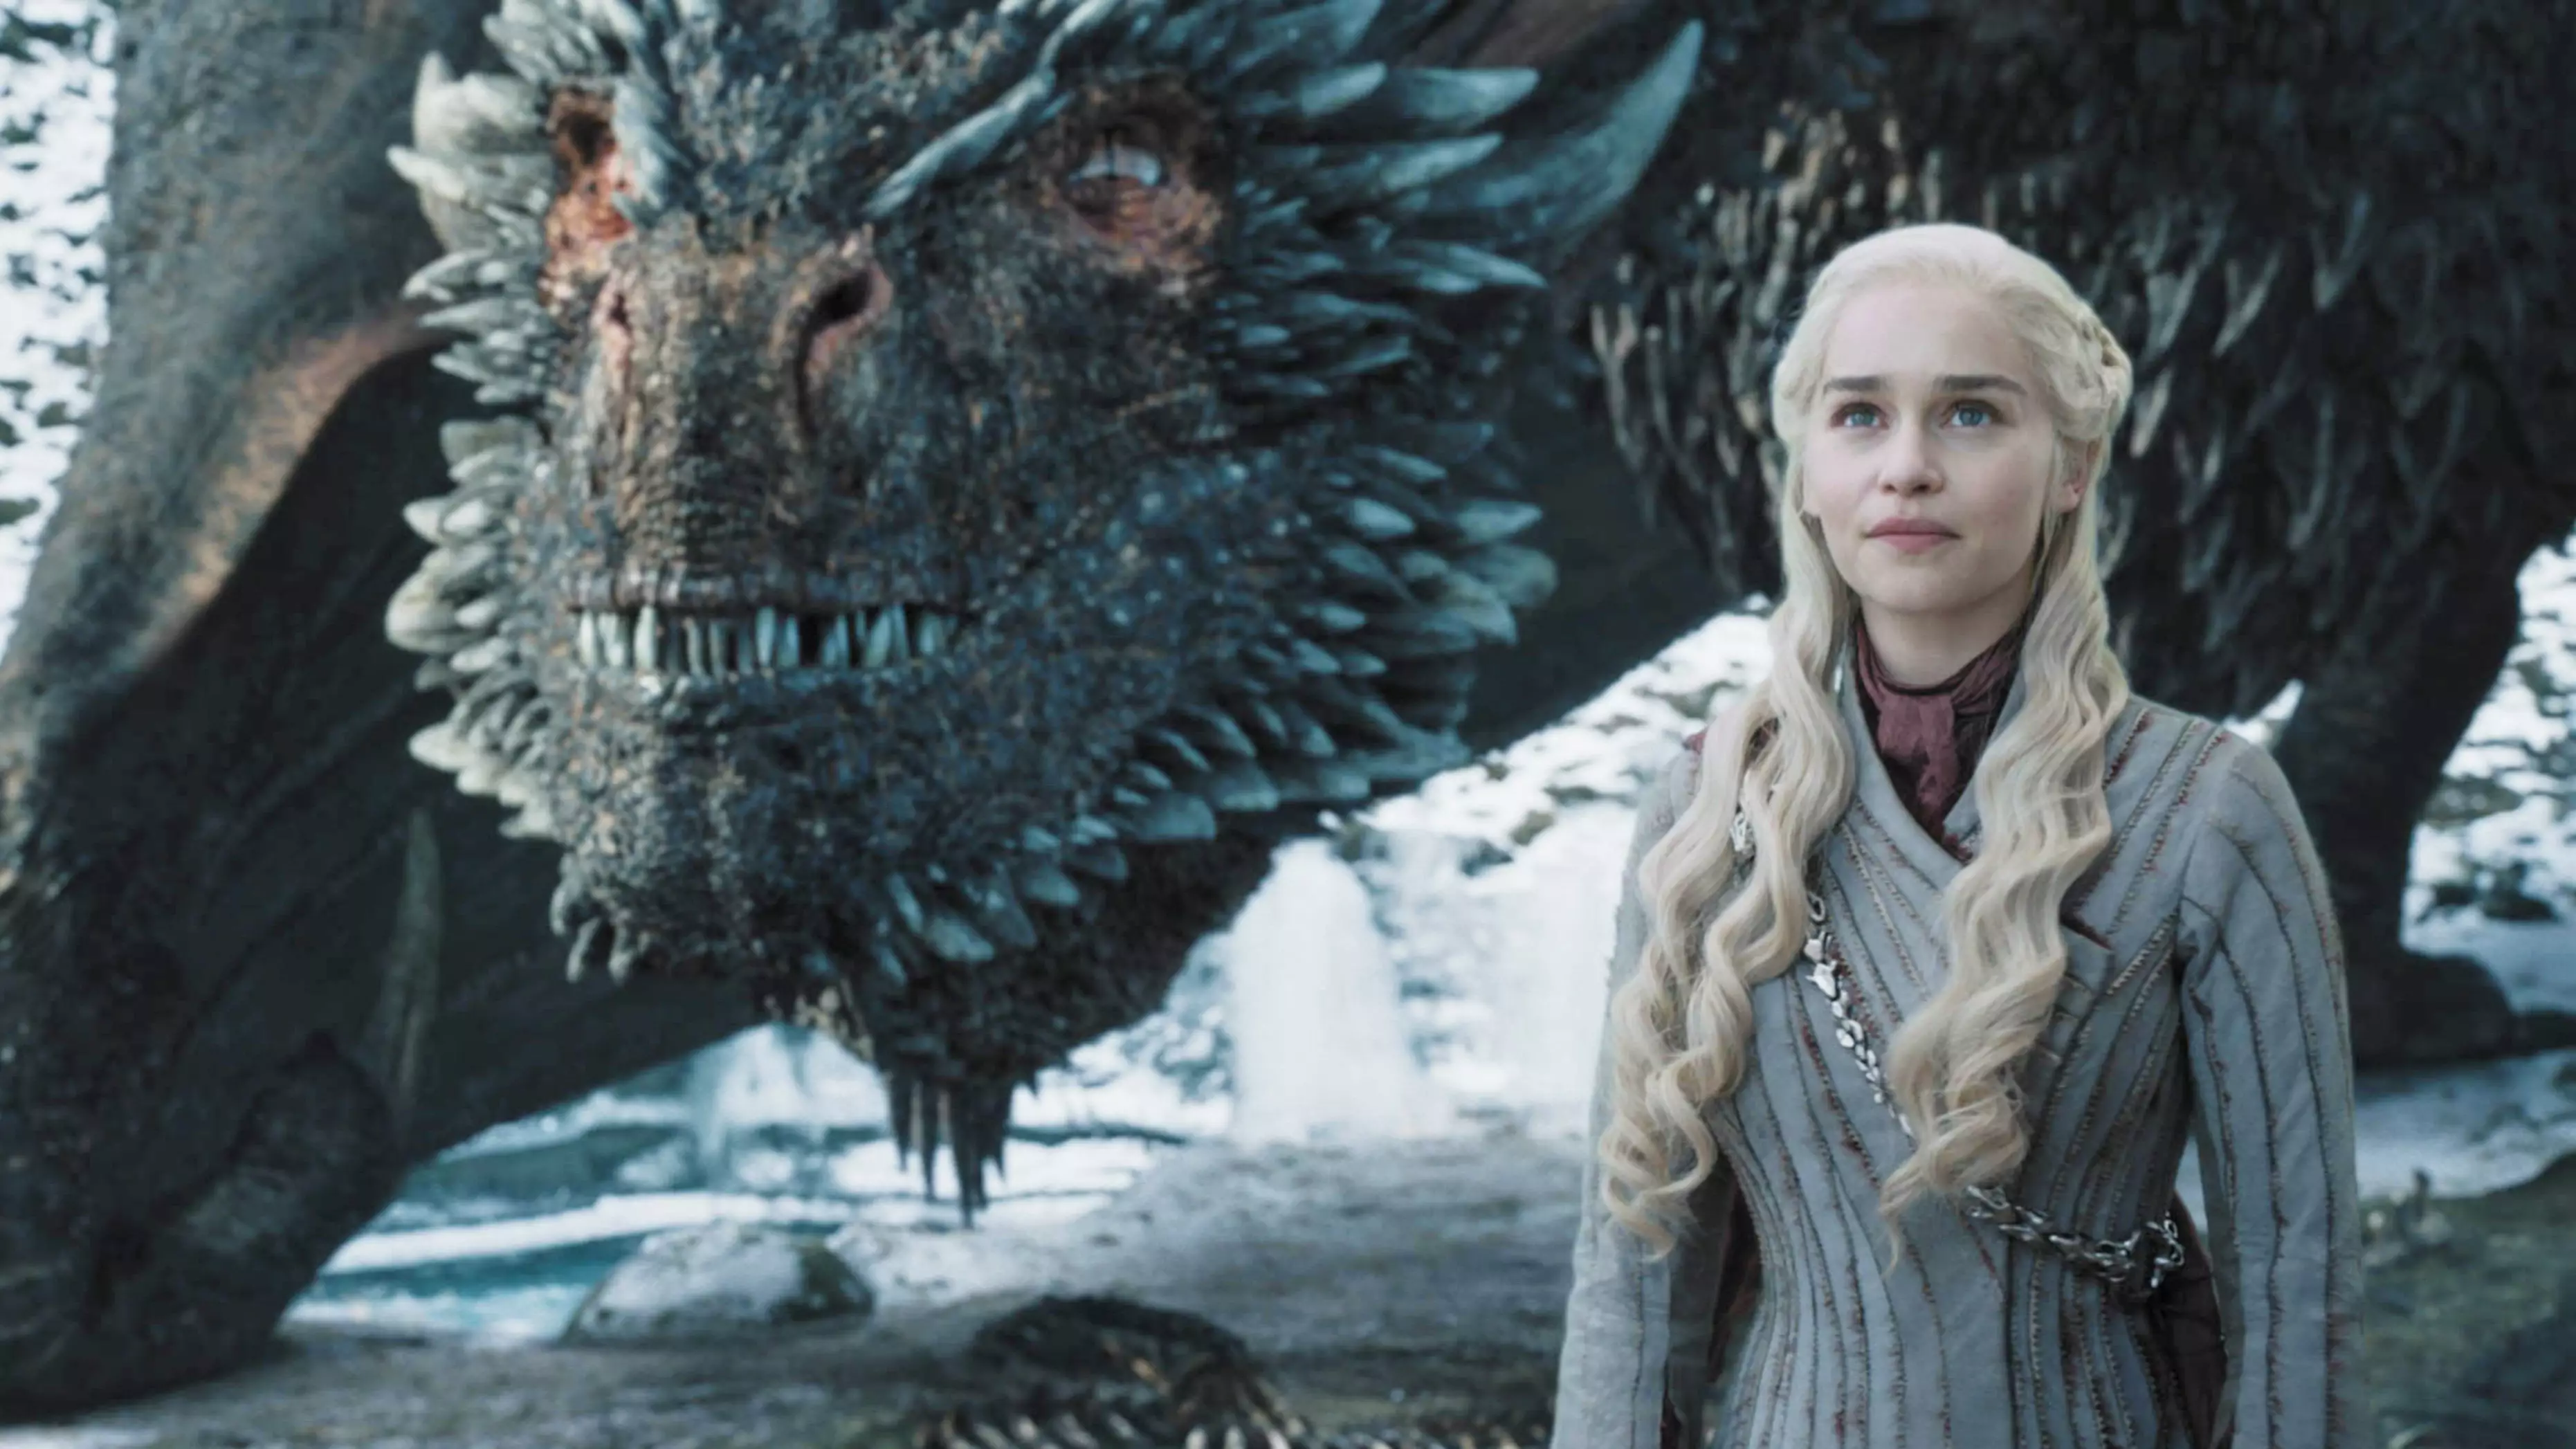 Expert Suggests That Drogon Might Have Eaten Daenerys Targaryen After She Died